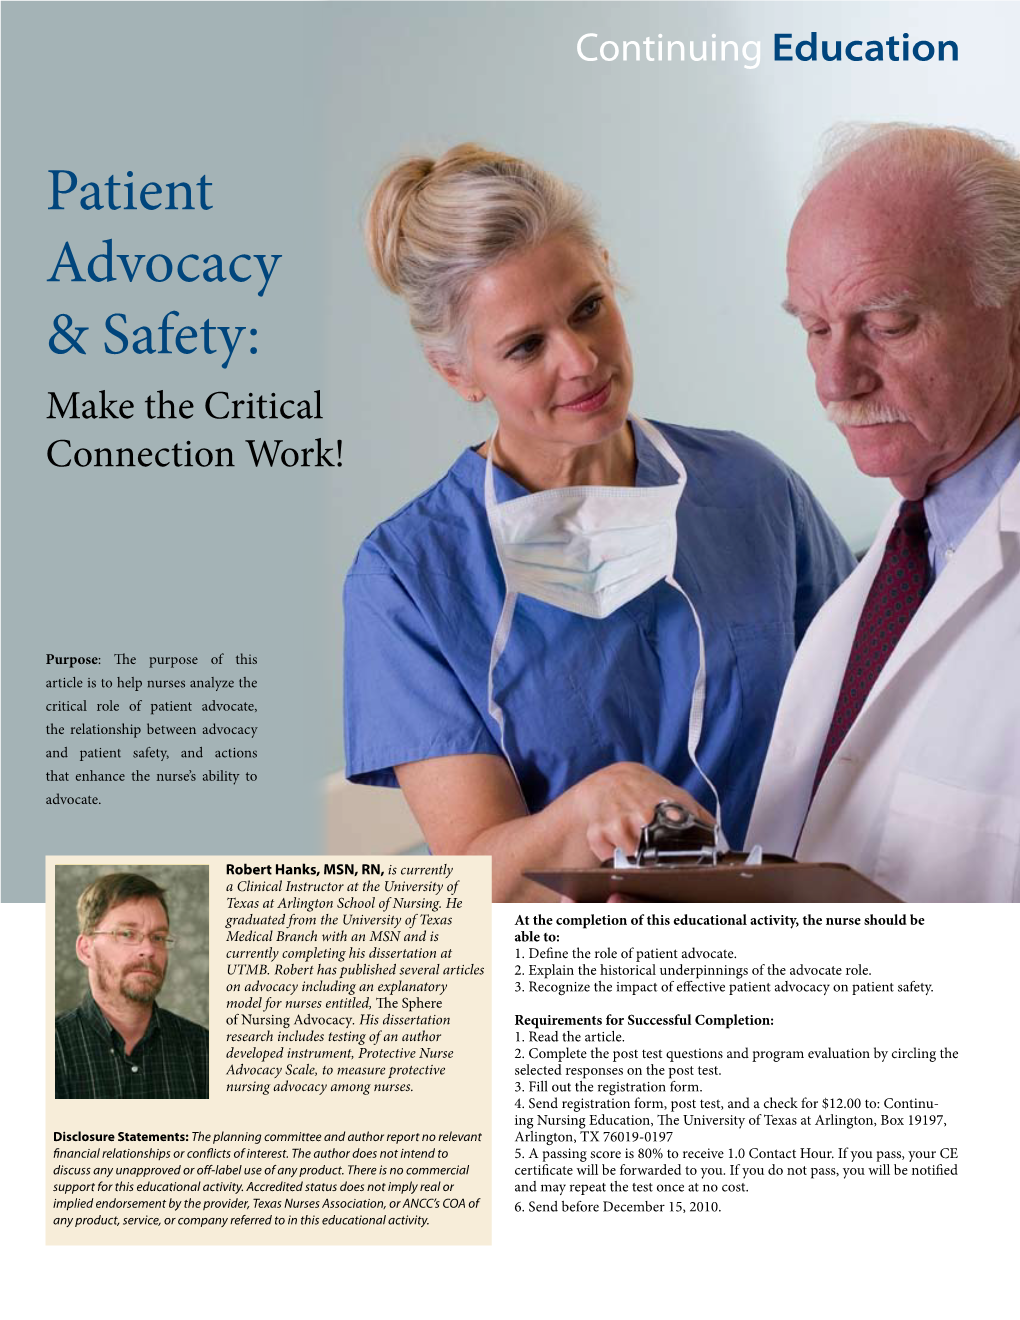 Patient Advocacy & Safety